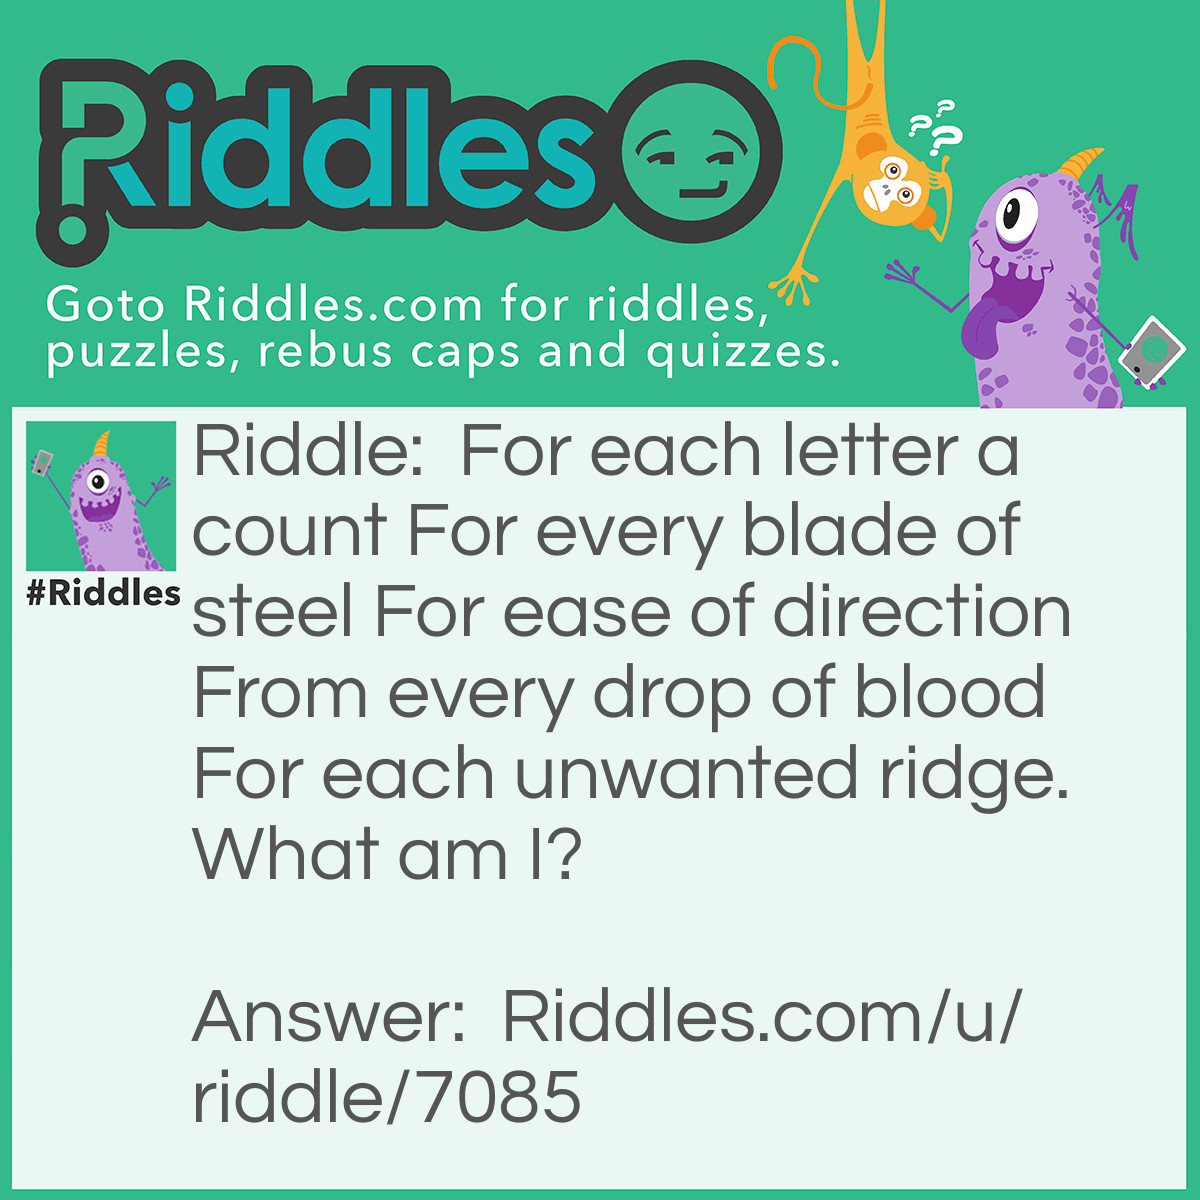 Riddle: For each letter a count
For every blade of steel
For ease of direction
From every drop of blood
For each unwanted ridge.
What am I? Answer: Iron (Fe).